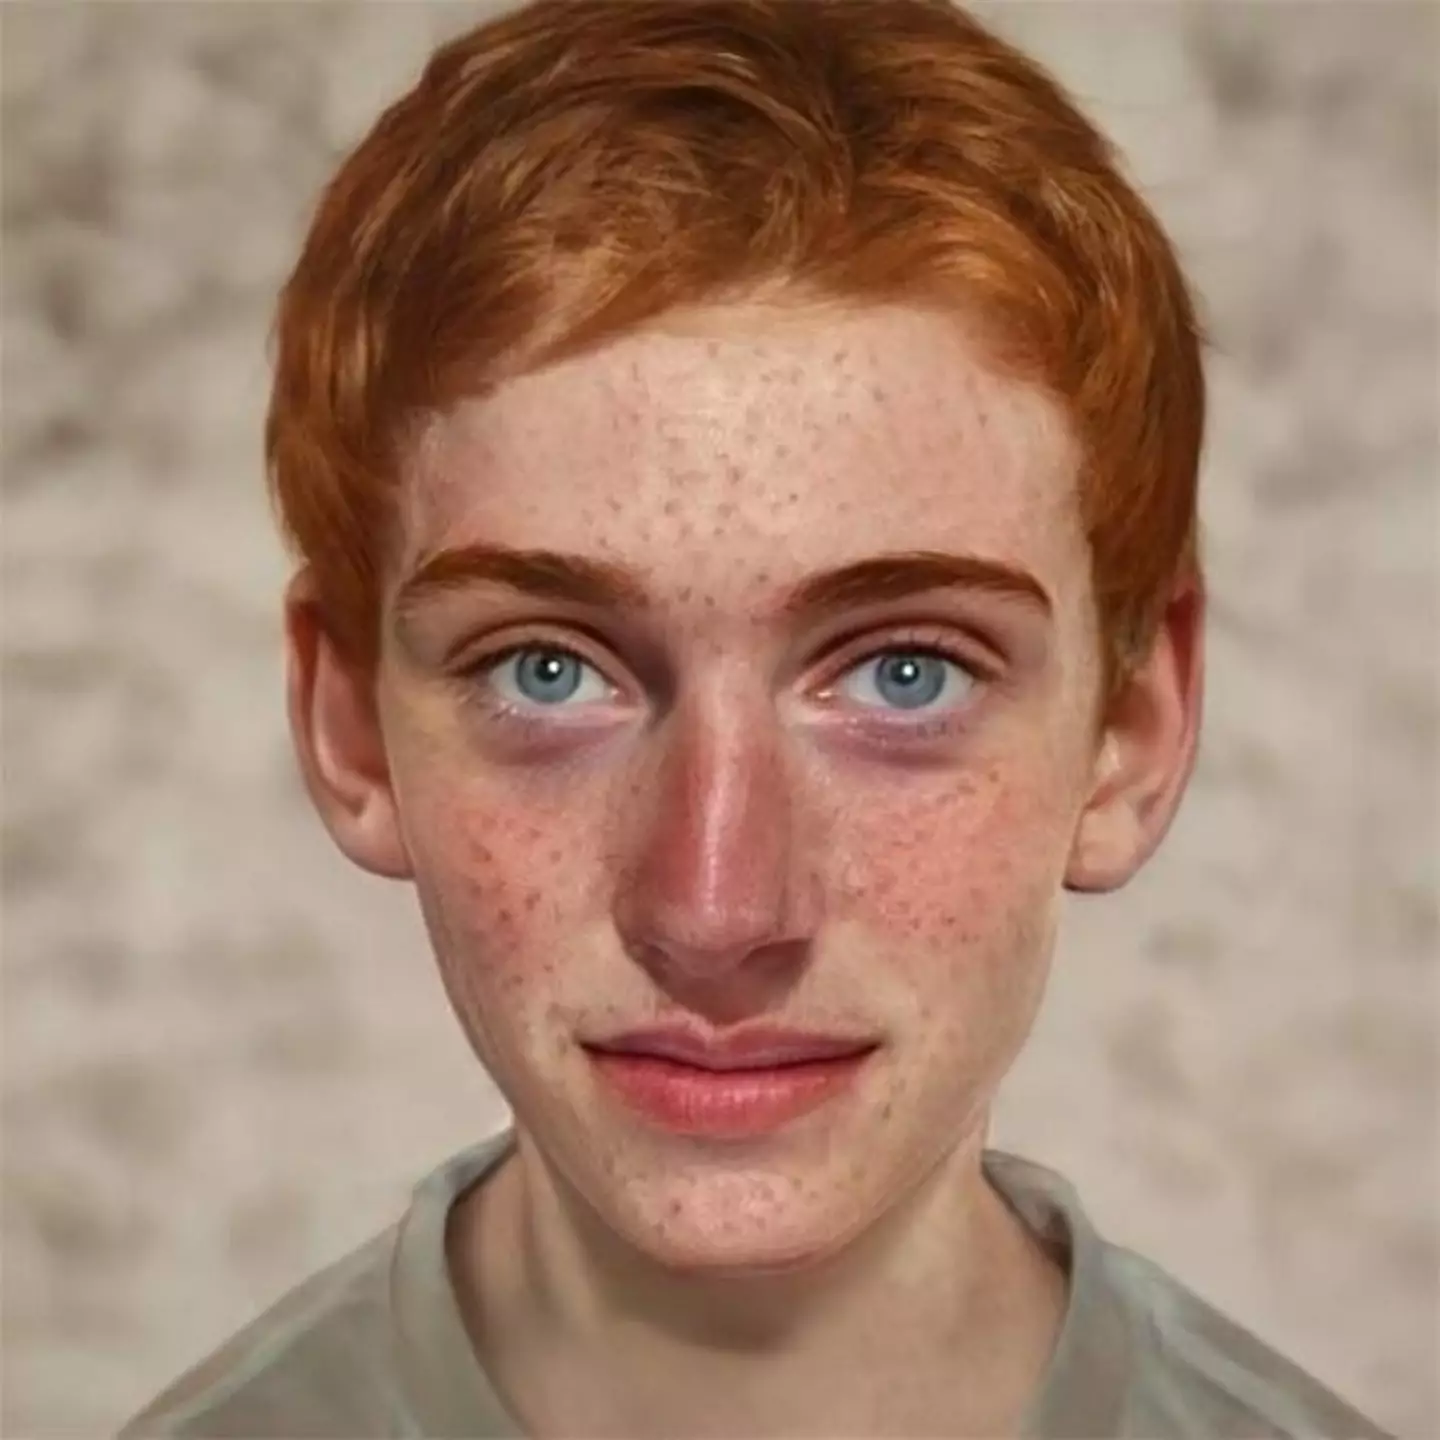 Ron Weasley as imagined by the artist.